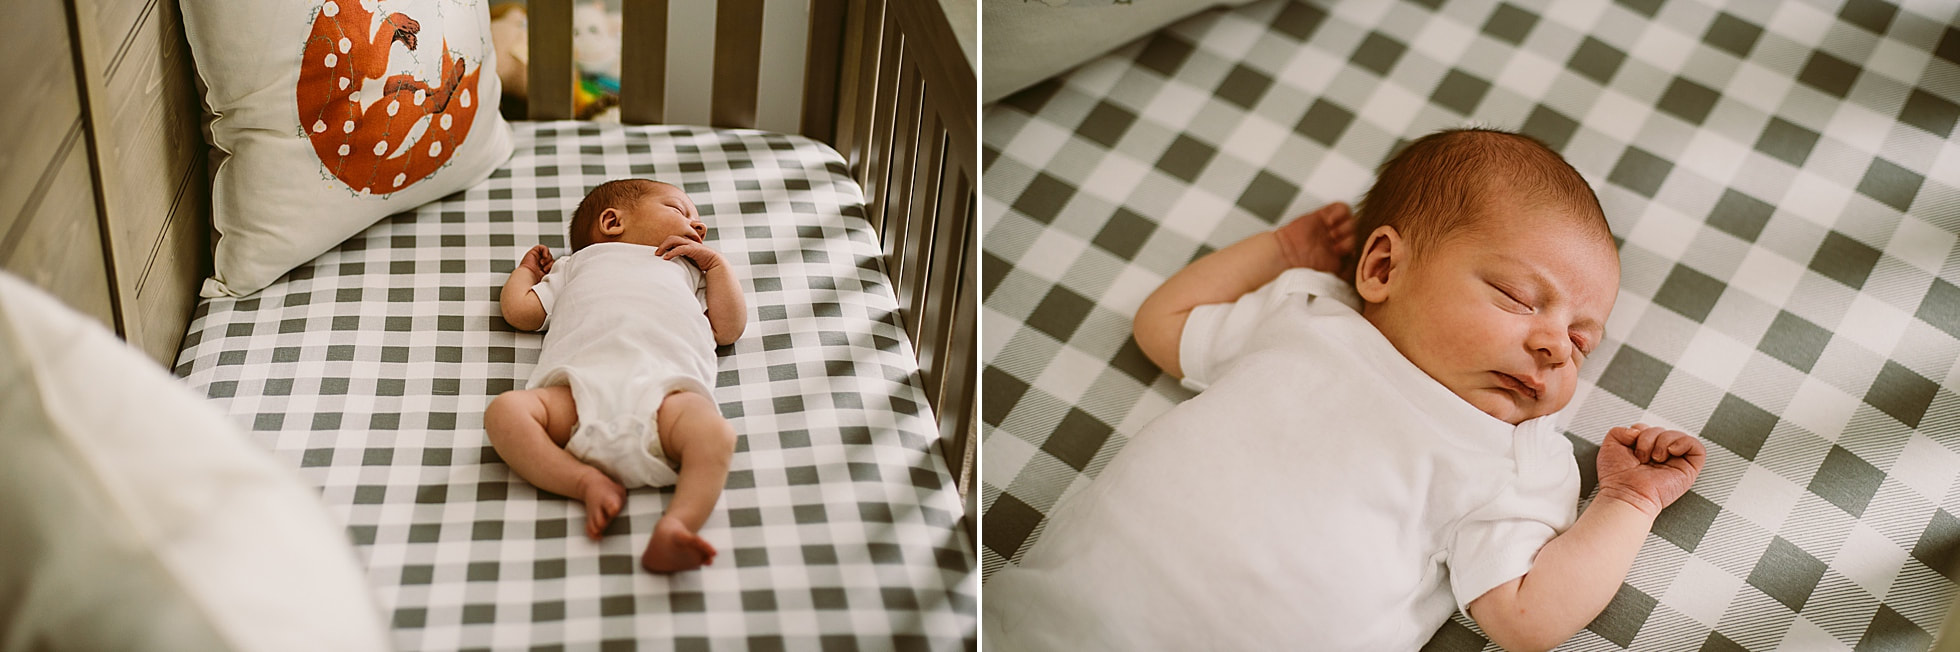 Newborn in crib during an at-home photography session by Laura Richards